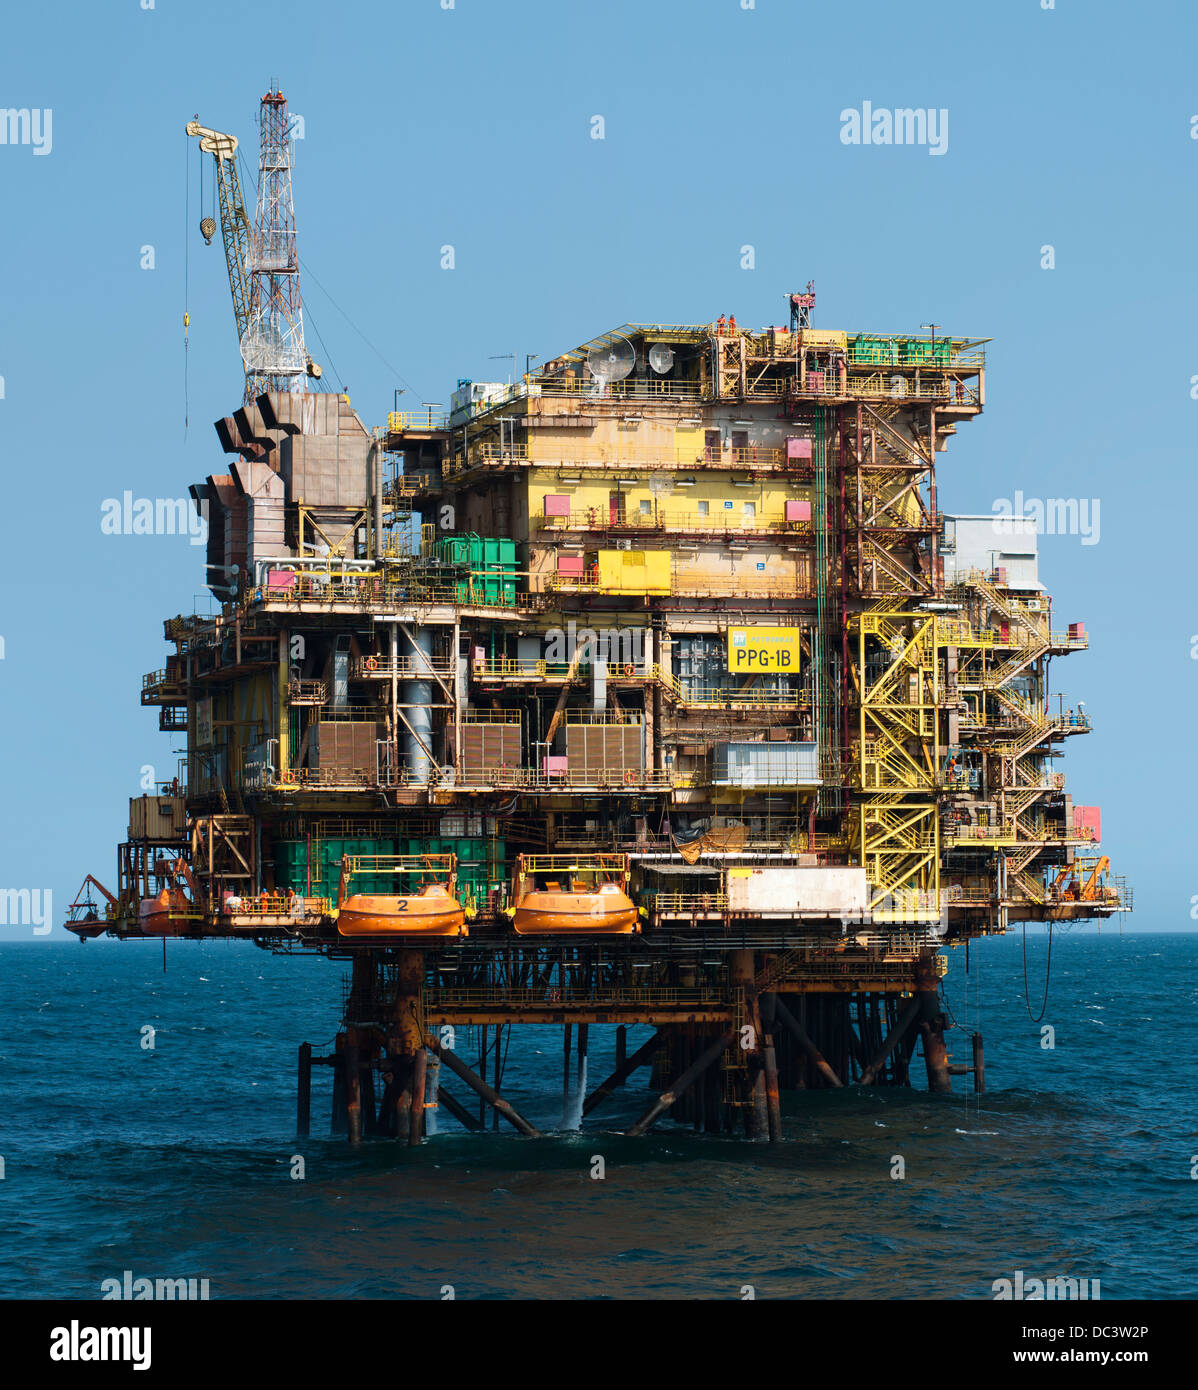 PPG1 fixed shallow oil platform from Petrobras offshore ...